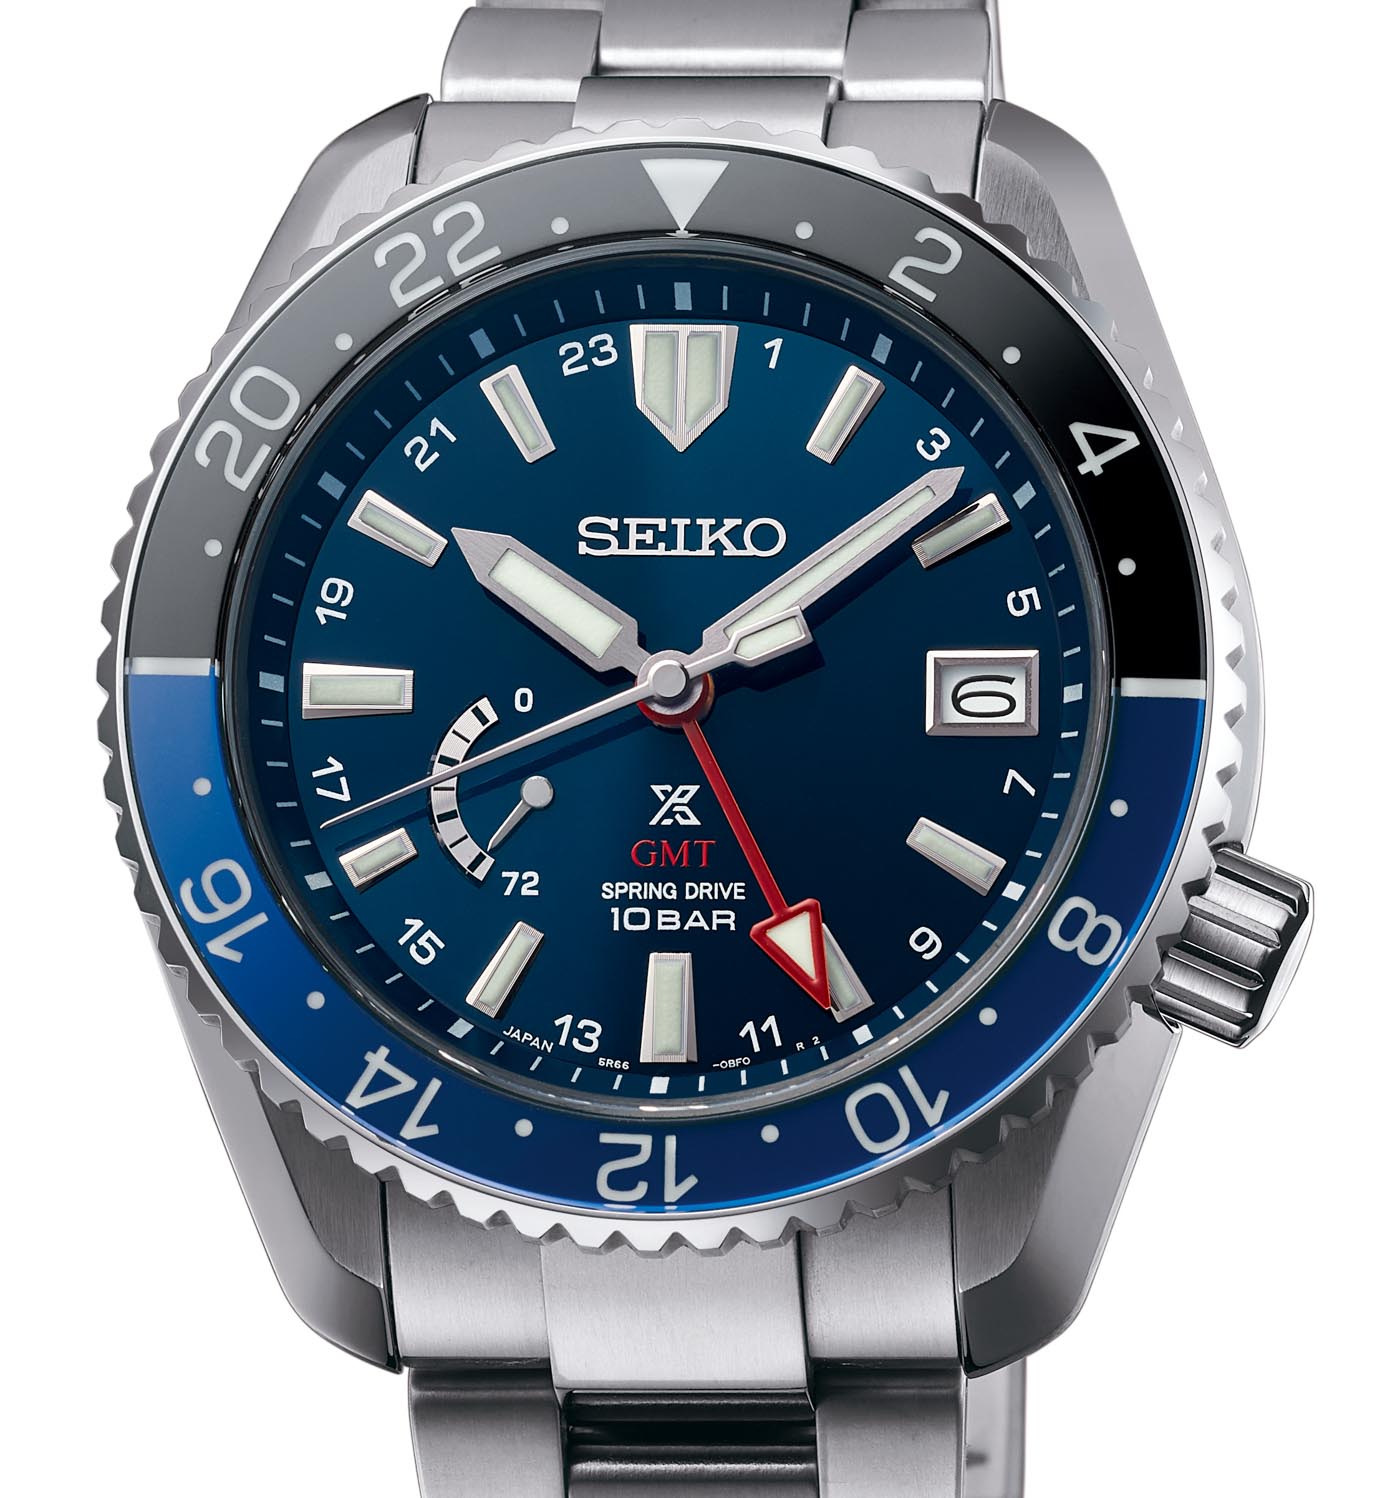 langsom Ondartet tumor onsdag Seiko Prospex LX Collection With Spring Drive Movements For BaselWorld 2019  | aBlogtoWatch